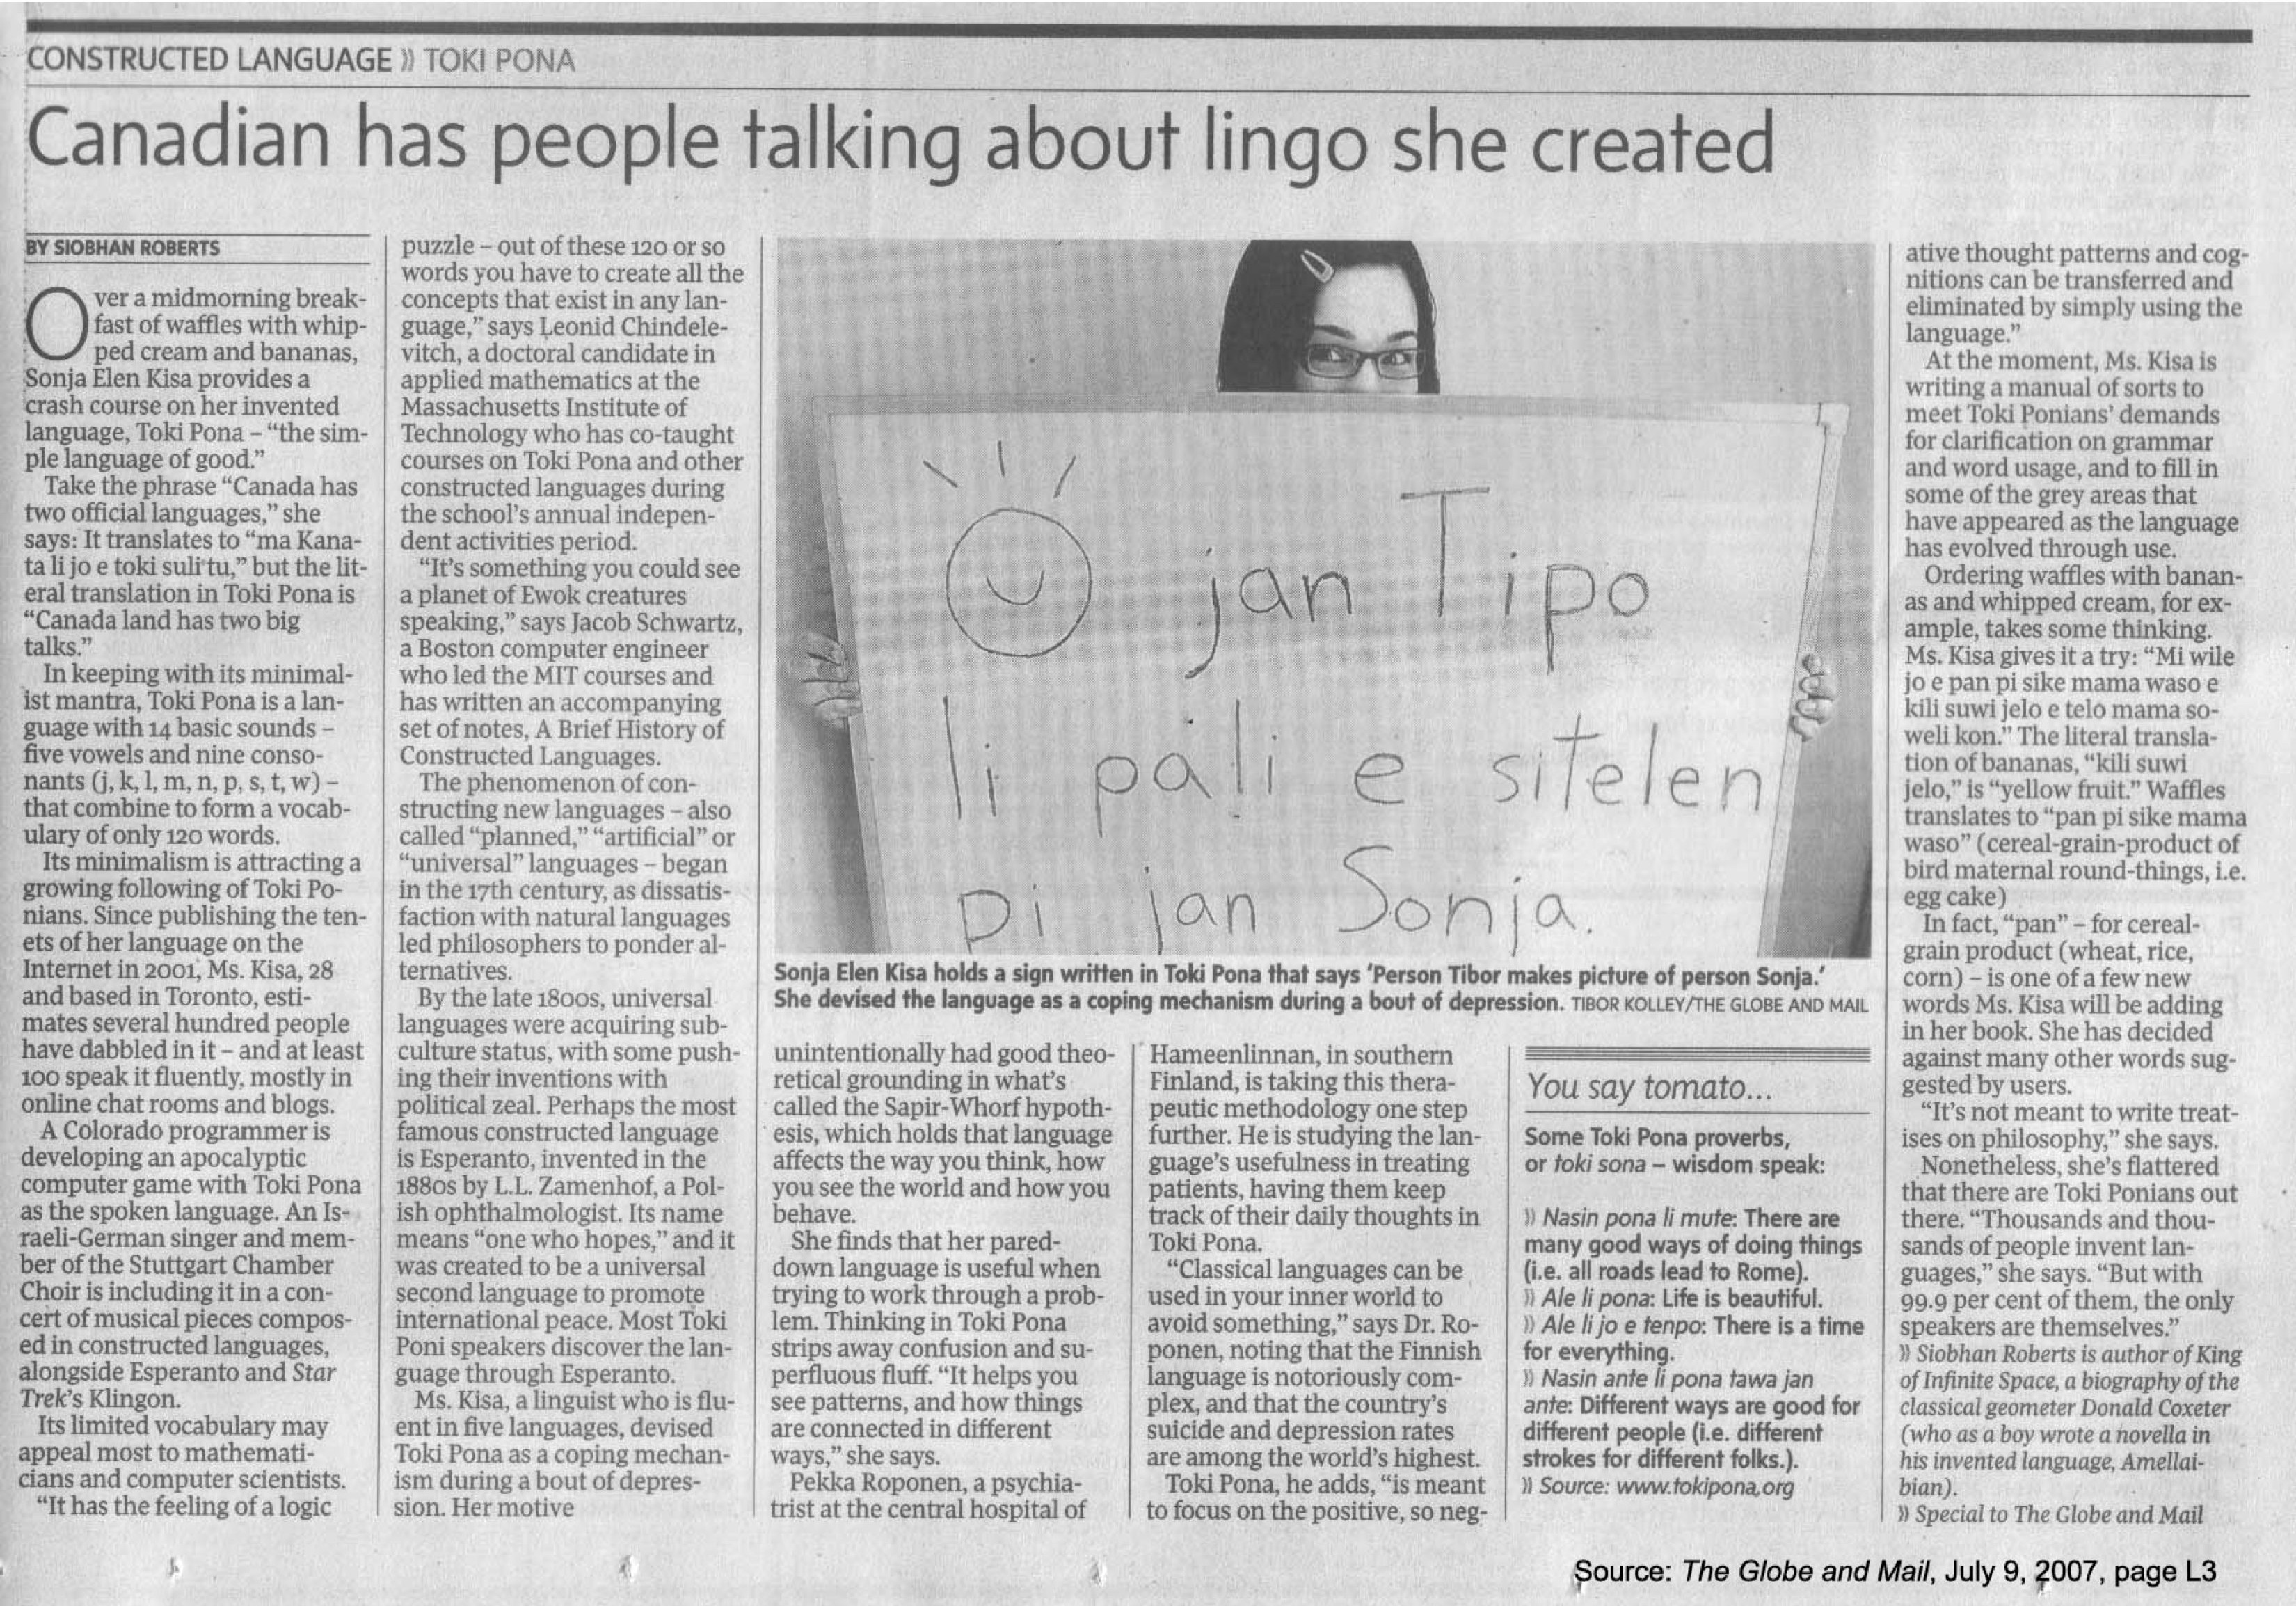 A newspaper clipping from The Globe and Mail (July 9, 2007) by Siobhan Roberts titled "Canadian has people talking about lingo she created".